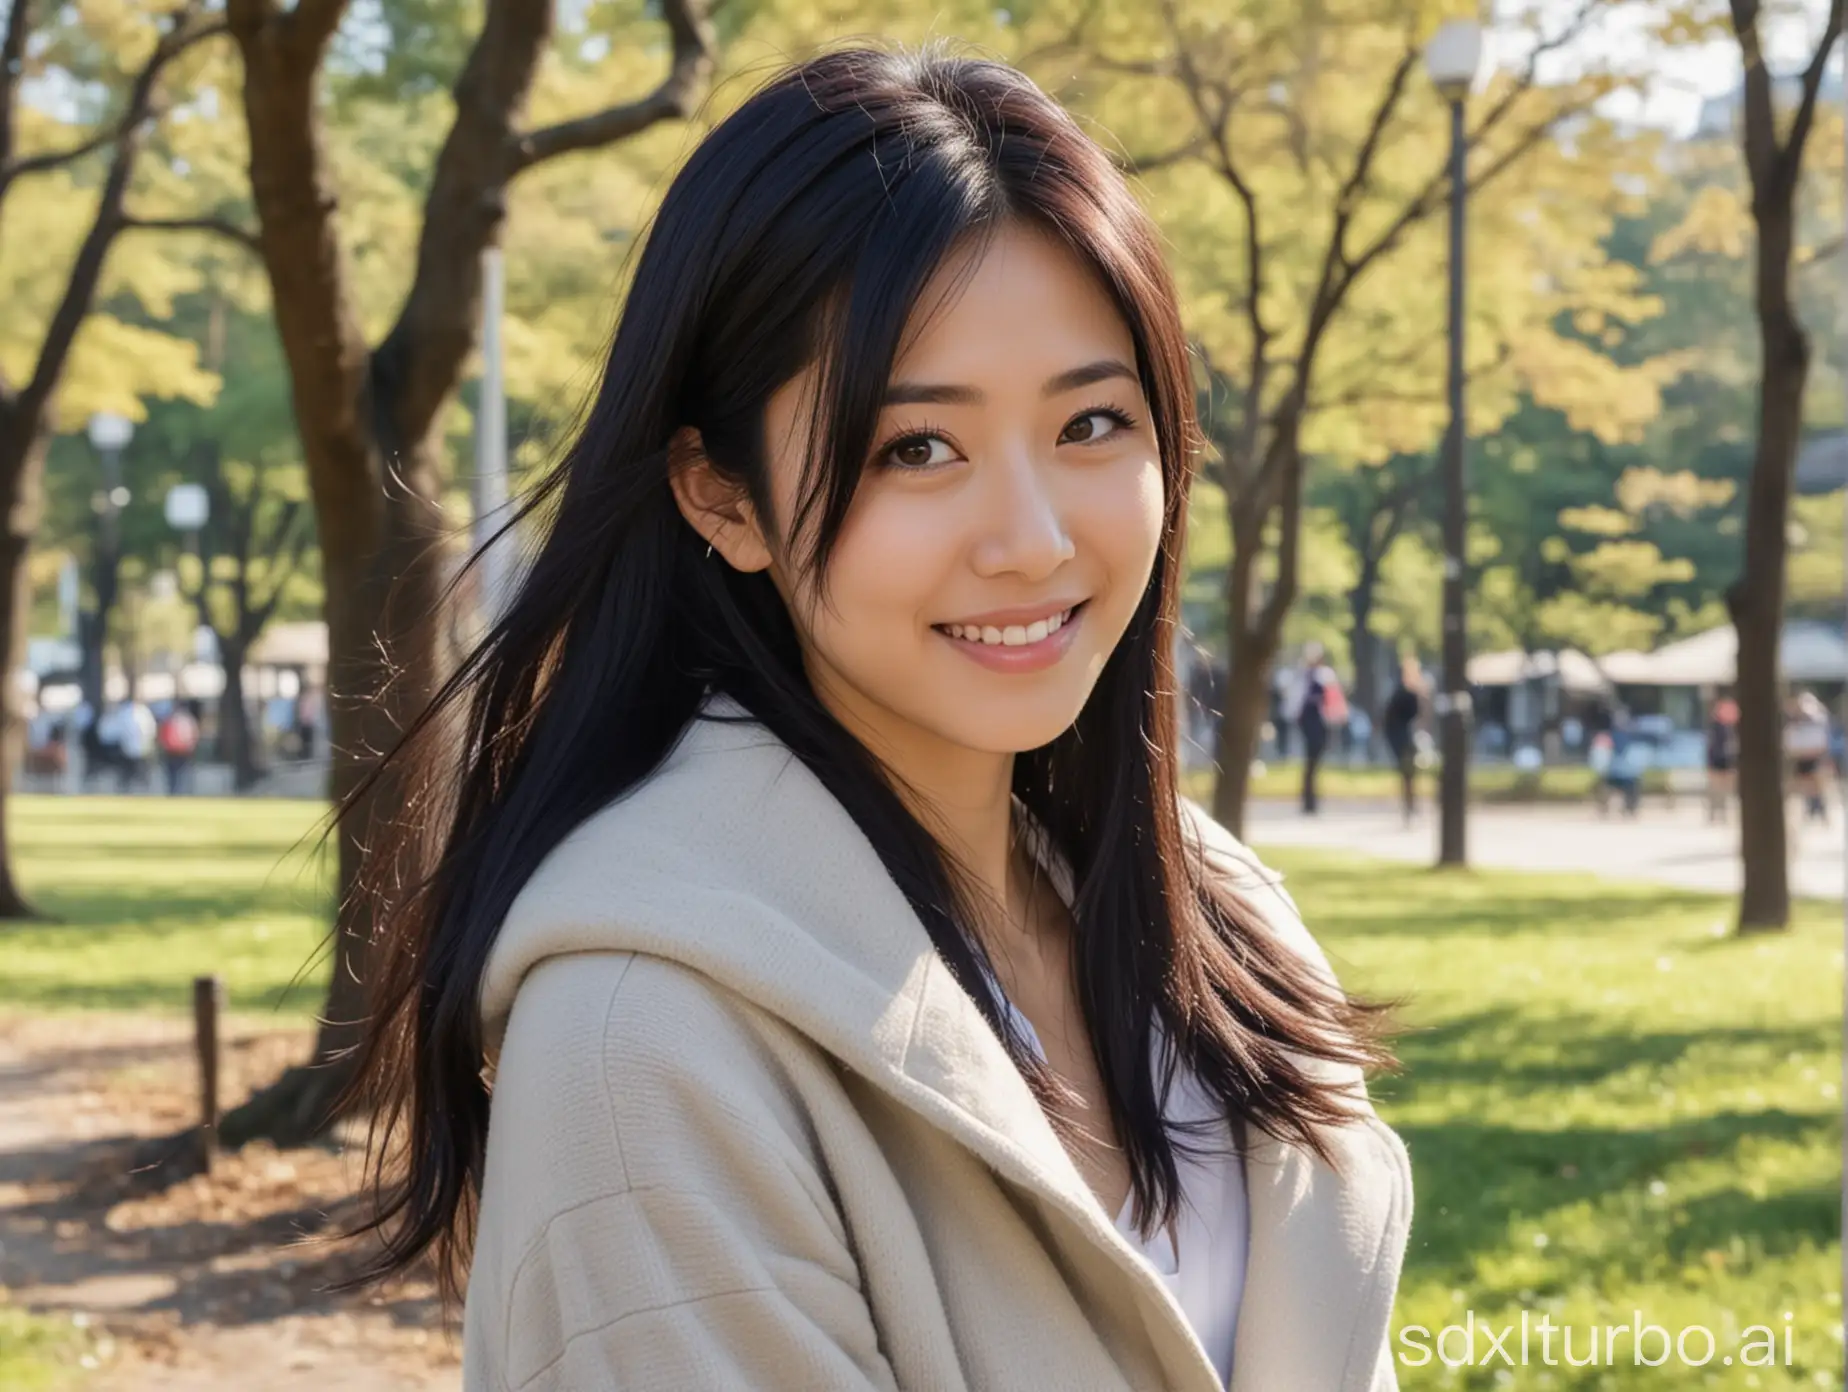 beautiful intellectual typical Japanese 33-year-old girl in a park smiling, sexy, Instagram model, long black hair, warm, black eyes, height 6.5 feets, female, masterpiece, 4k, correct fingers or hands, modern clothes